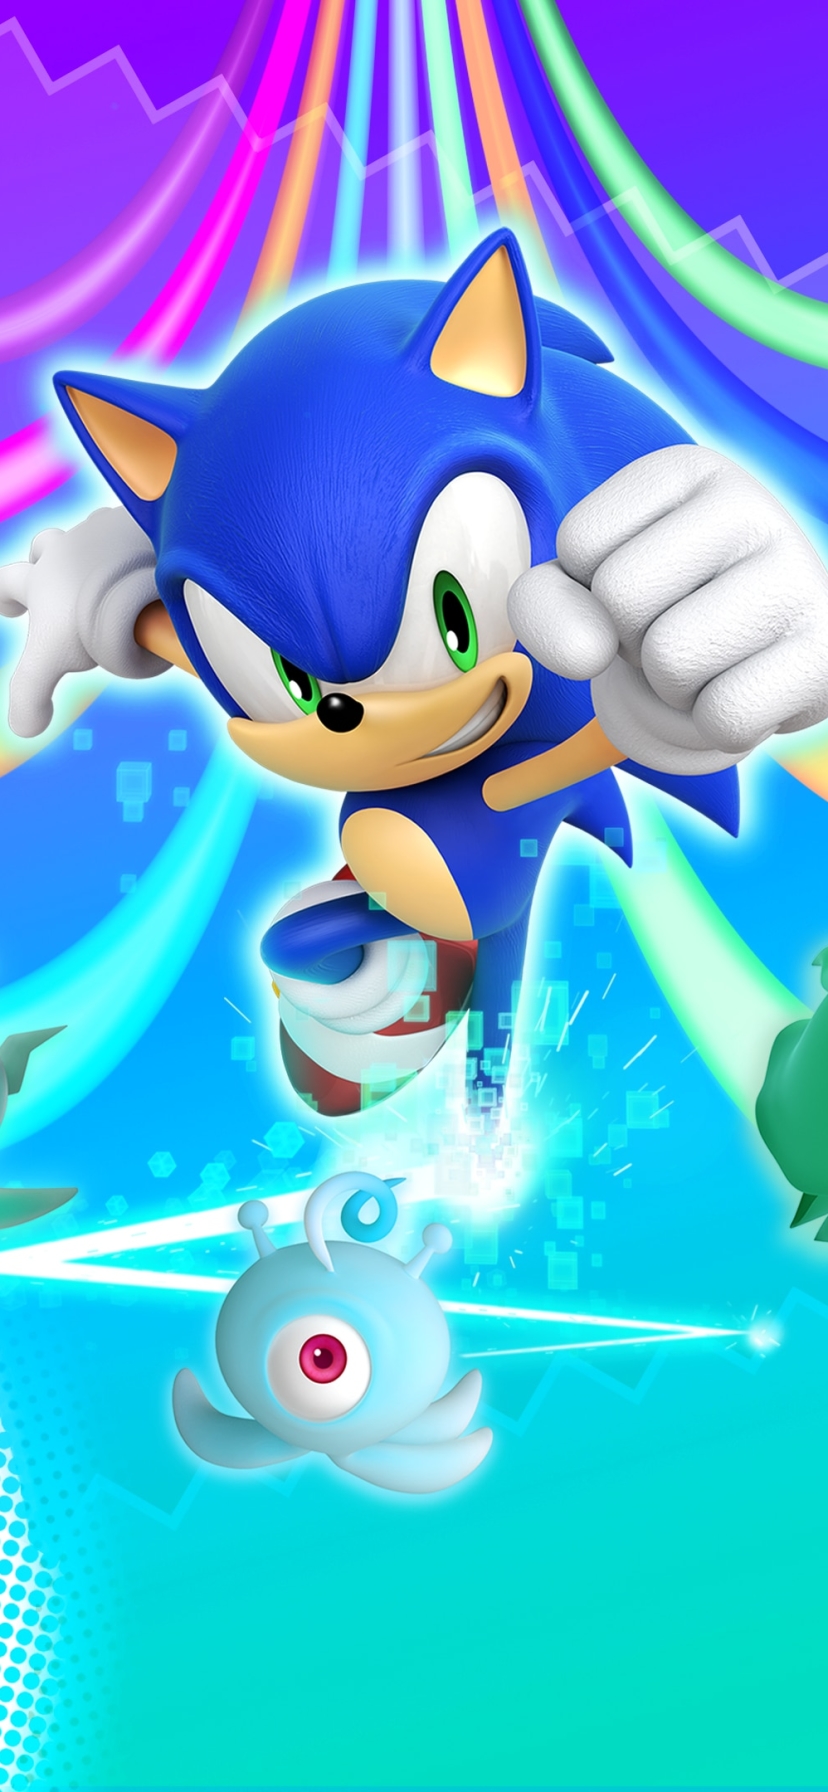 Sonic, sonic the hedgehog, sonic colors ultimate, HD phone wallpaper